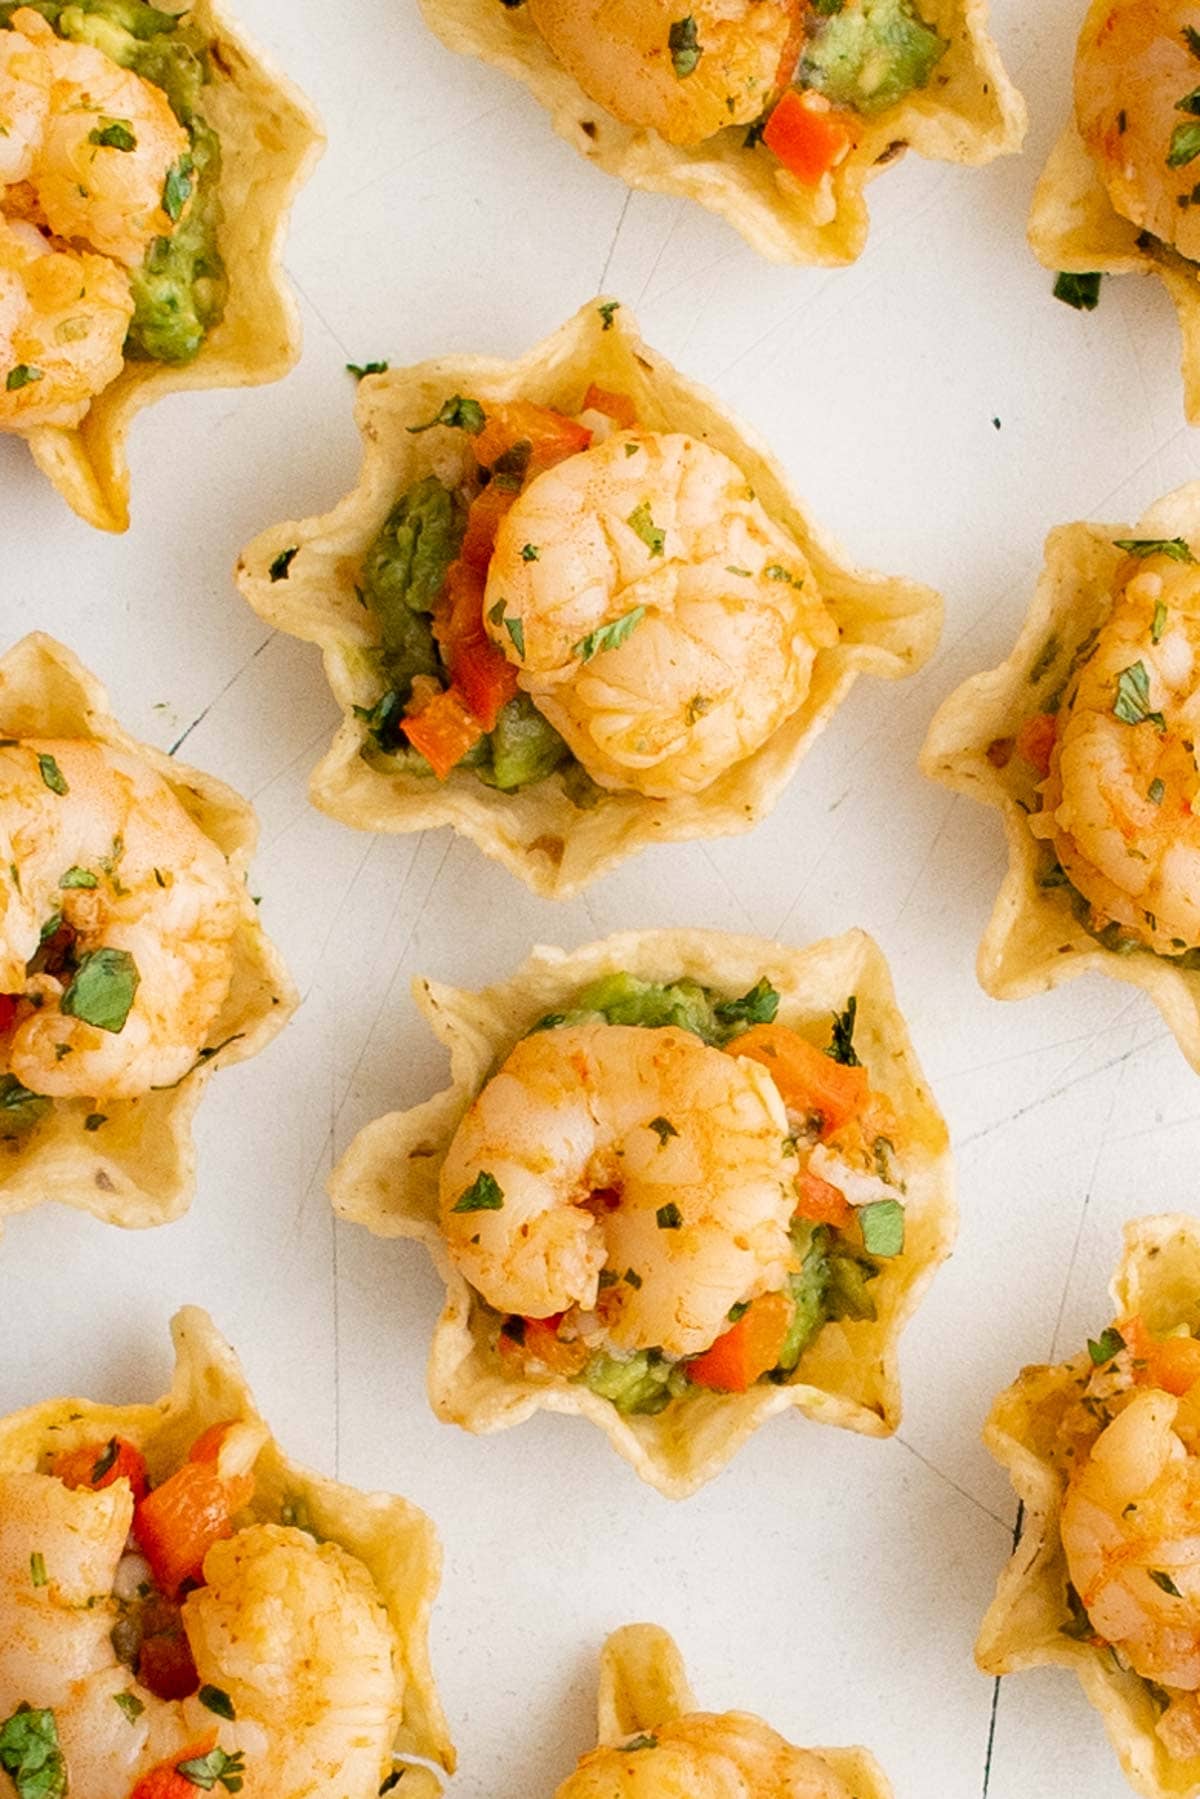 Shrimp in tostitos scoops tortilla chips with guacamole and bell pepper.